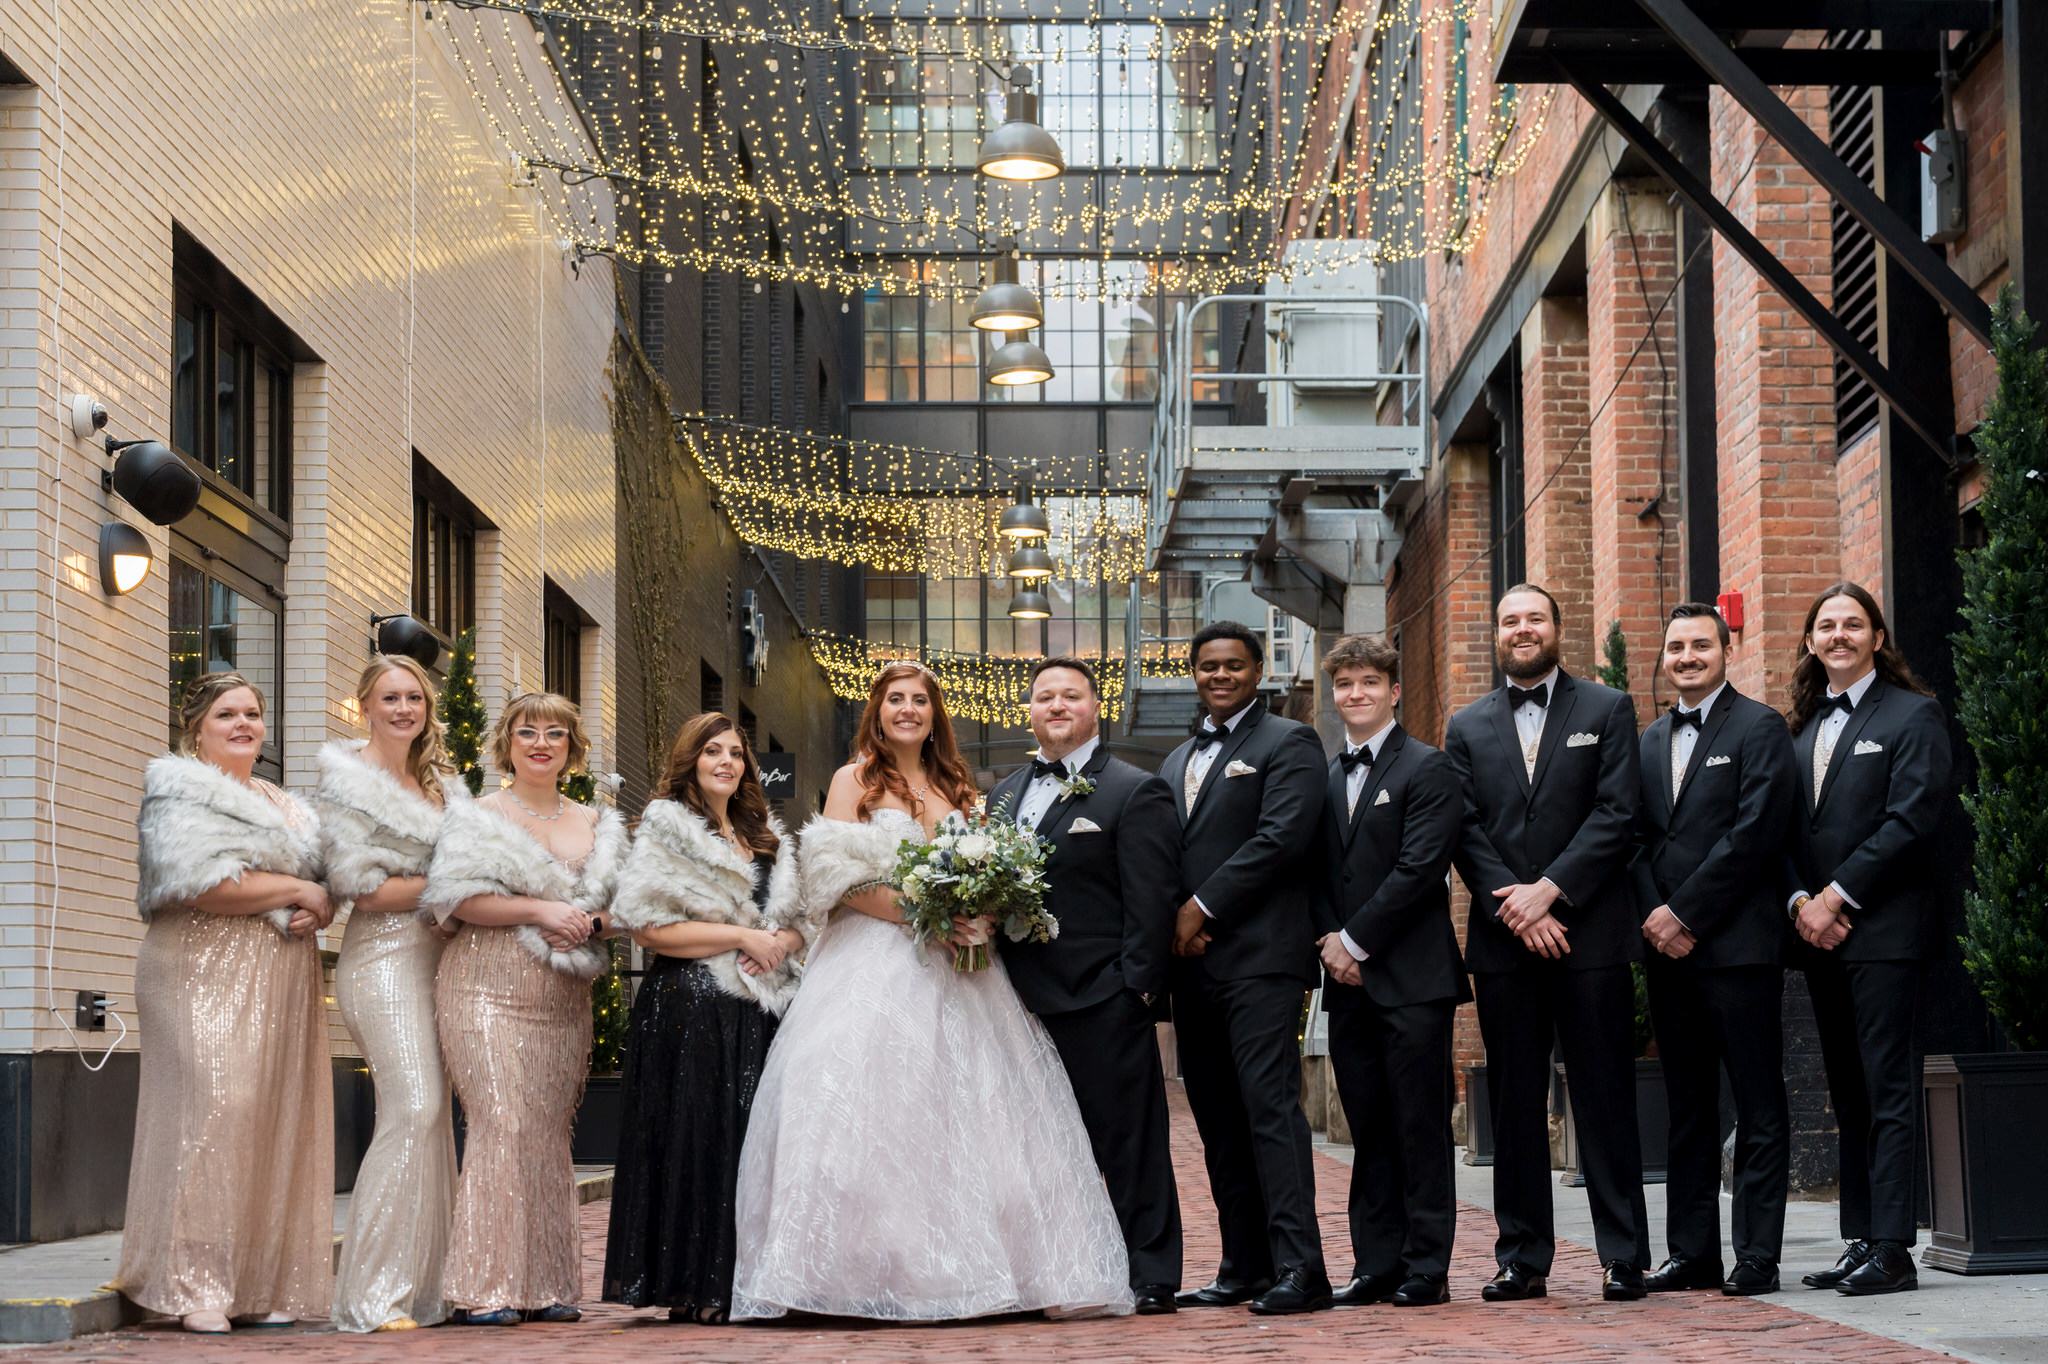 The bridal party poses for a formal portrait in Parker's Alley in Detroit, Michigan by Brian Weitzel Photography on New Years Eve.